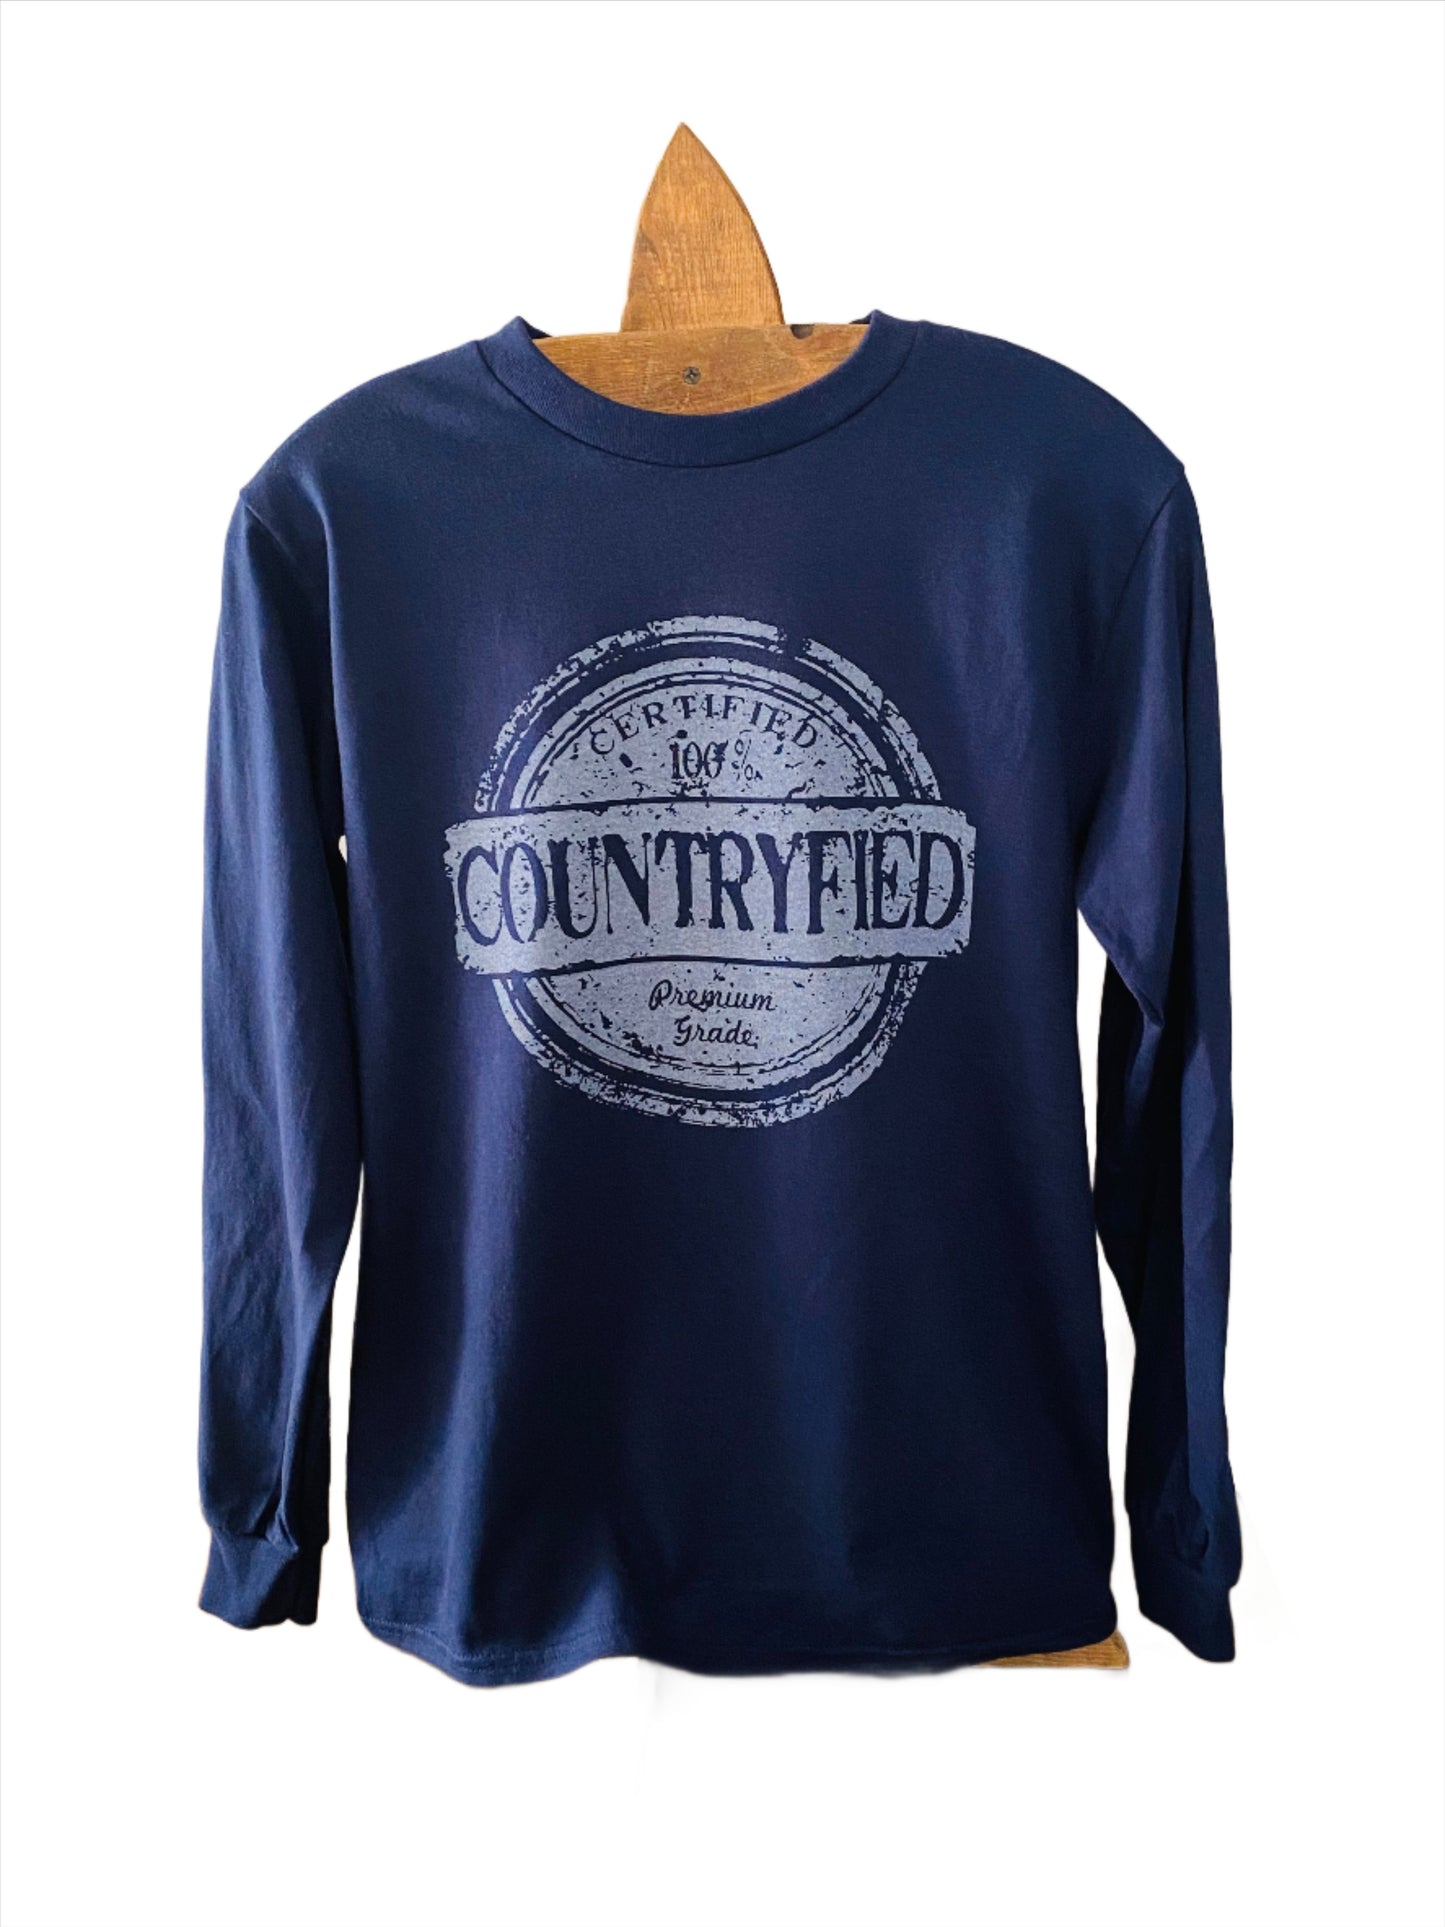 100% Countryfied Long Sleeve